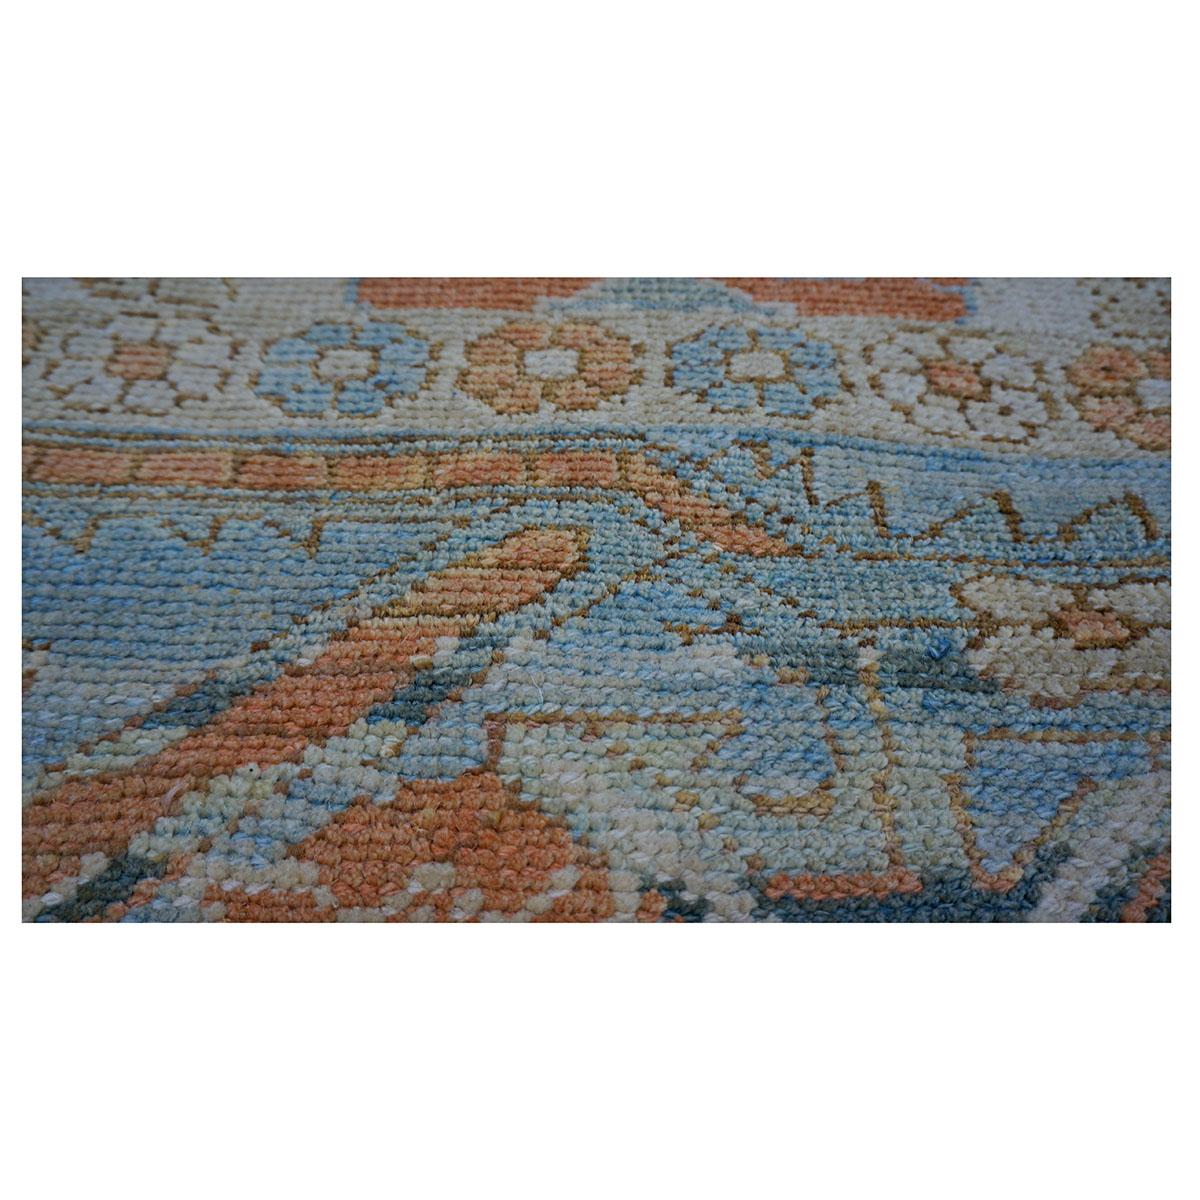 Hand-Woven 21st Century William Morris Donegal Carpet 10x13 Tan & Blue Handmade Area Rug For Sale